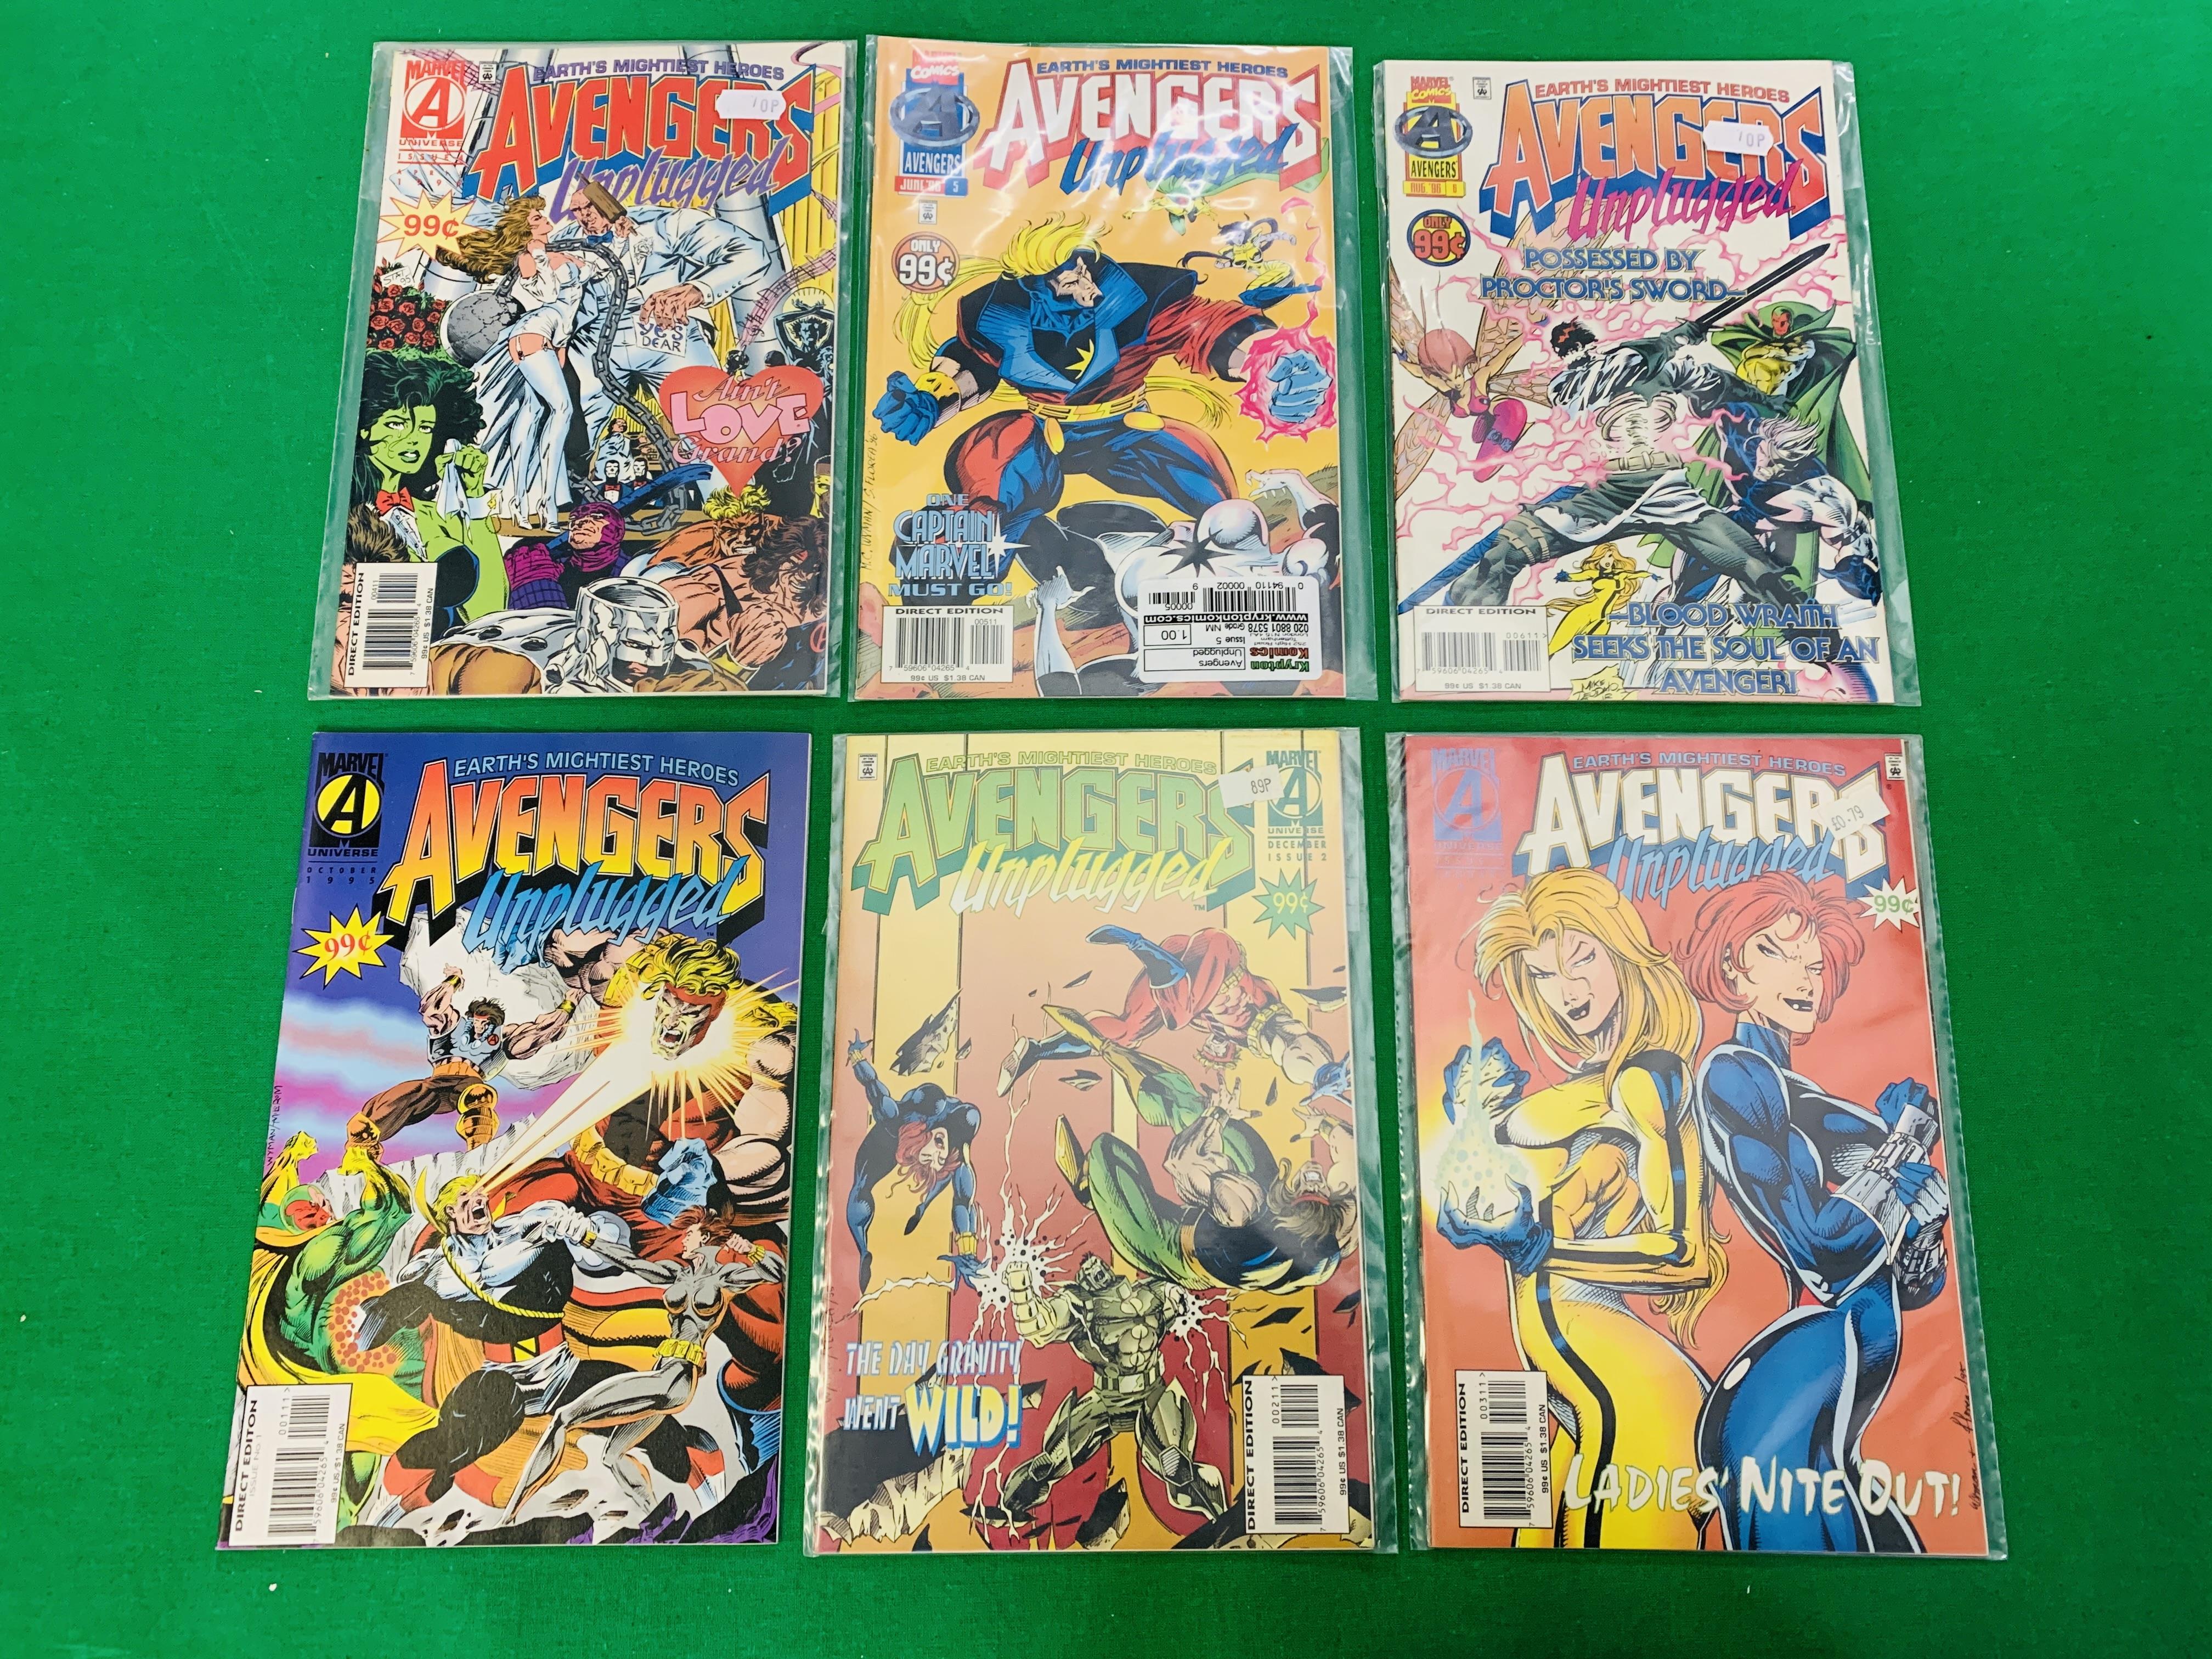 MARVEL COMICS THE AVENGERS UNPLUGGED NO. 1 - 6 FROM 1996, FIRST APPEARANCE NO. 5. MONICA RAMBEAU.